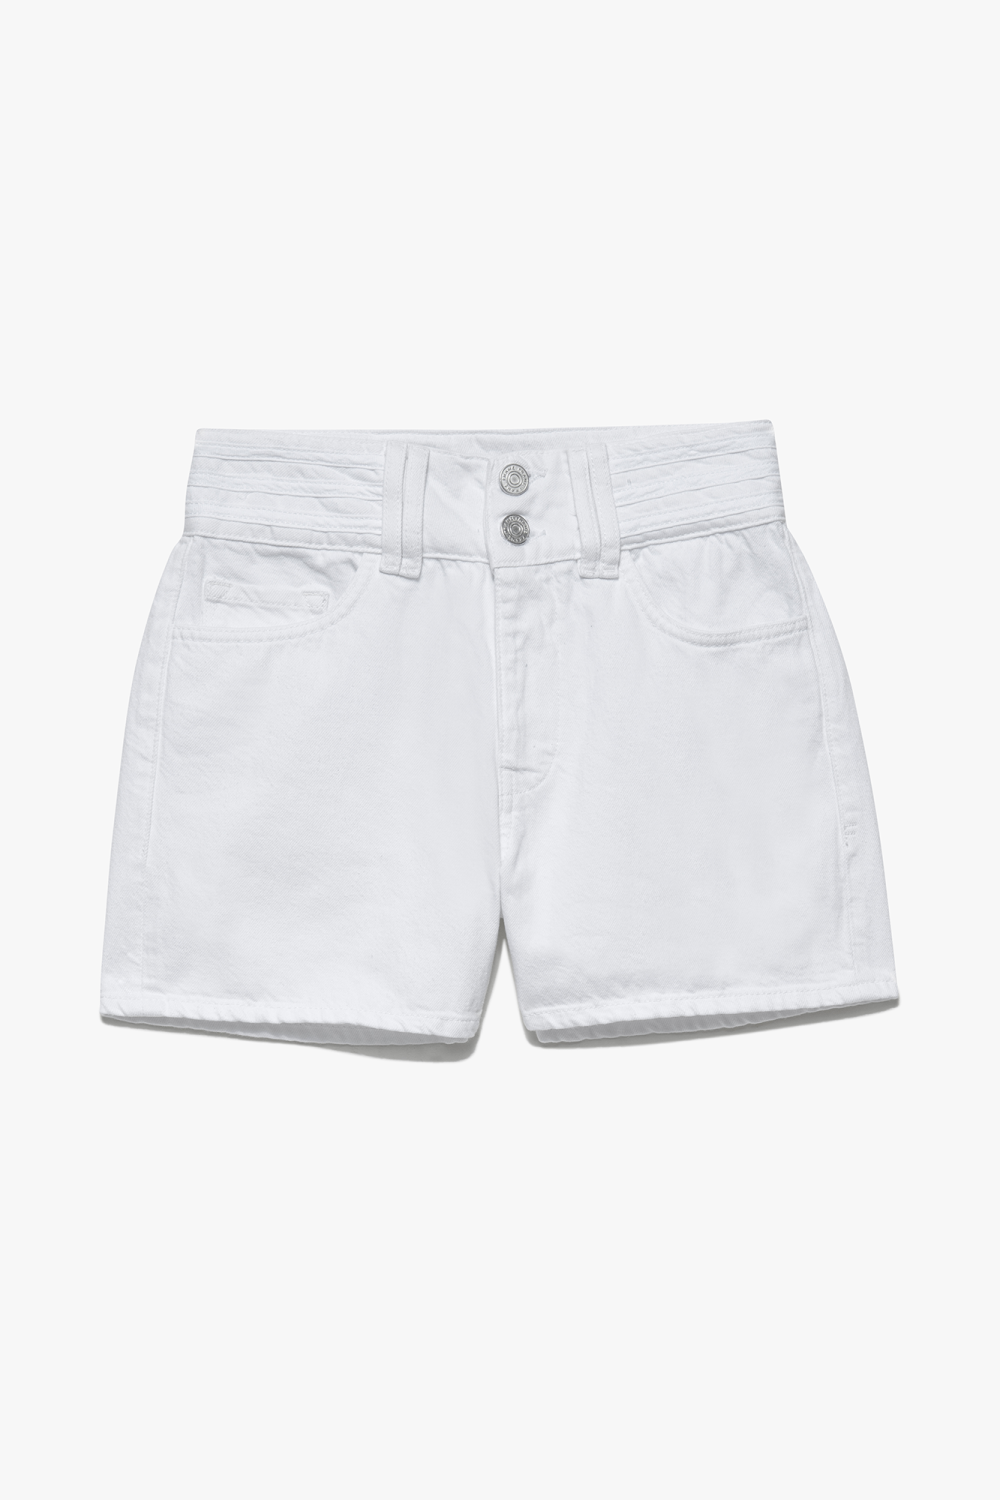 The Triple Binding Short from Frame is a high rise, white, five-pocket short with two front metal buttons, front pockets and belt loops. 